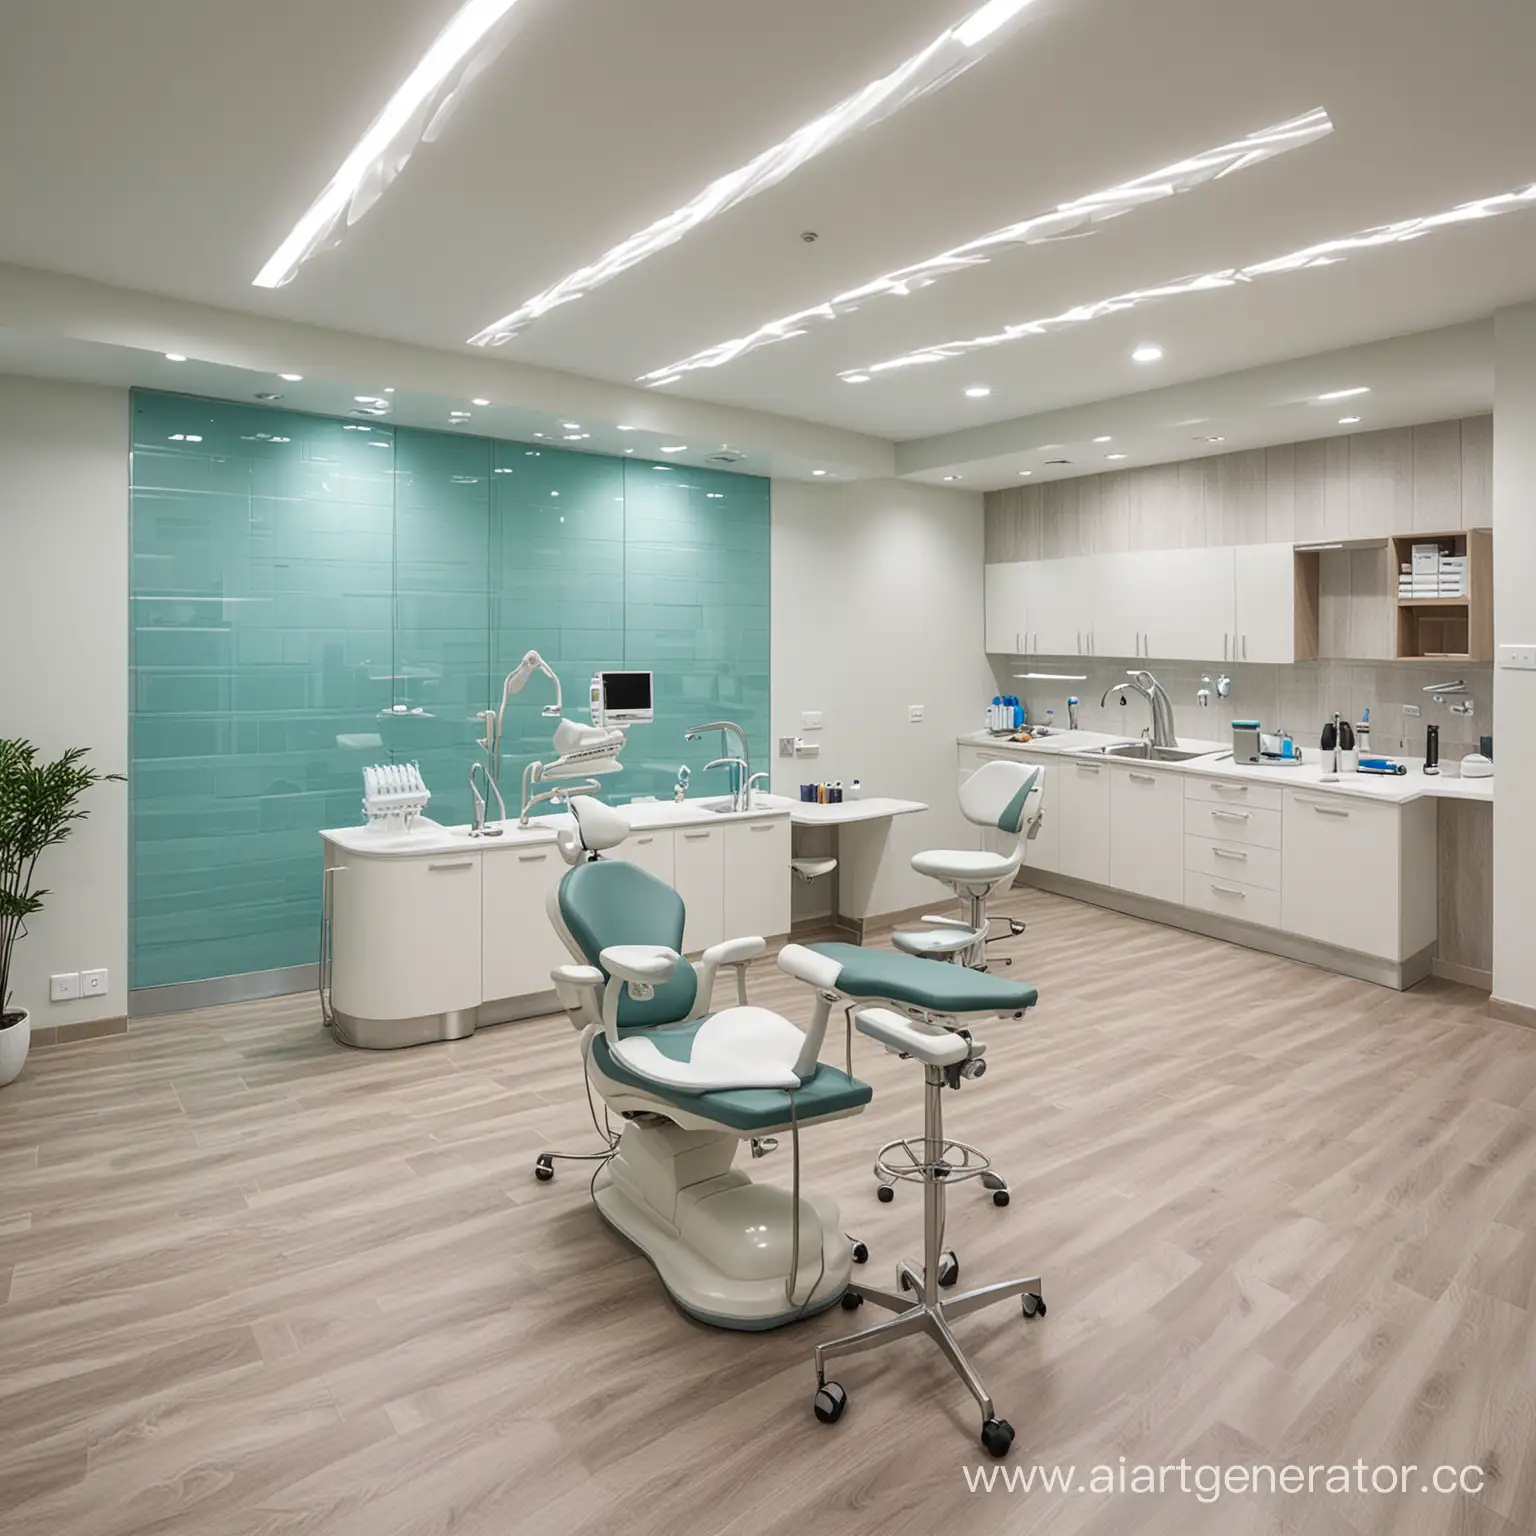 Bright-and-Modern-Dental-Clinic-Design-with-Comfortable-Patient-Environment